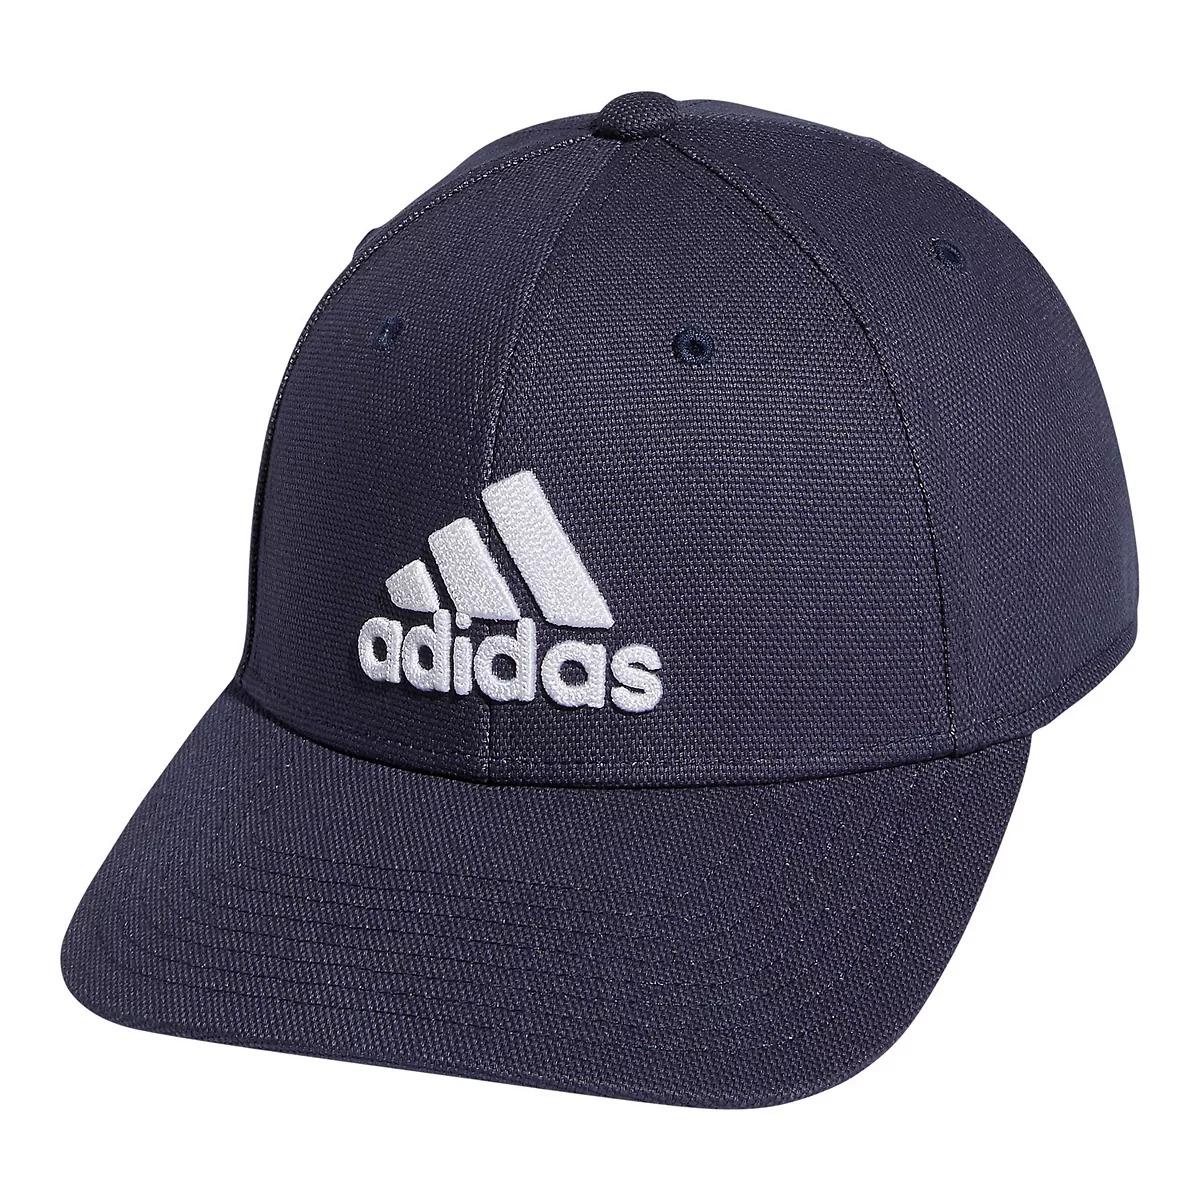 Adidas Mens Producer 2 Stretch-Fit Hat for $11.52